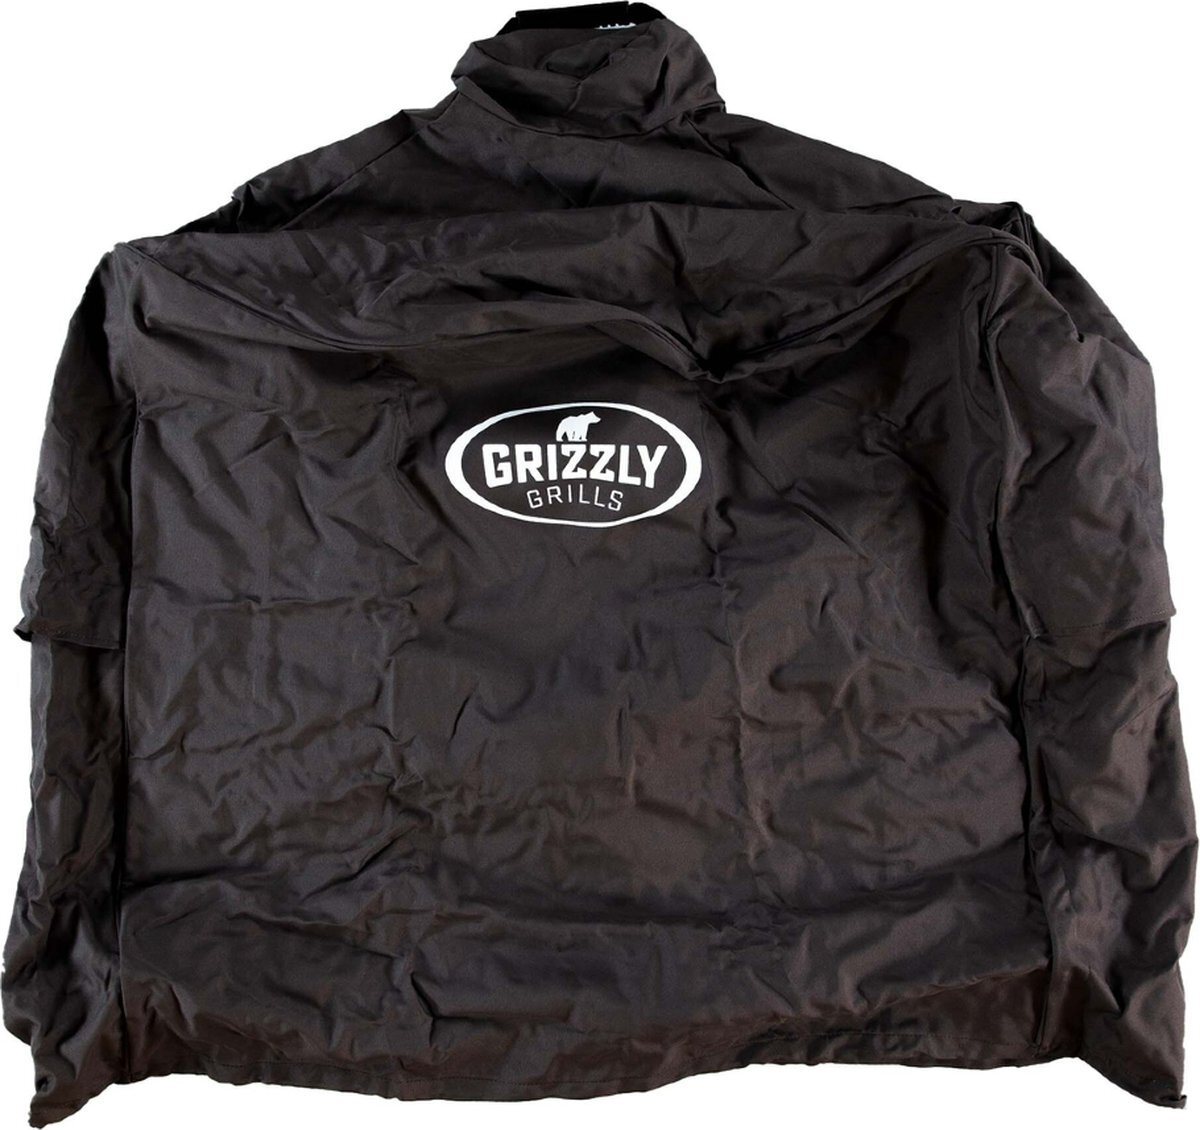 Grizzly Grills Regenhoes Large